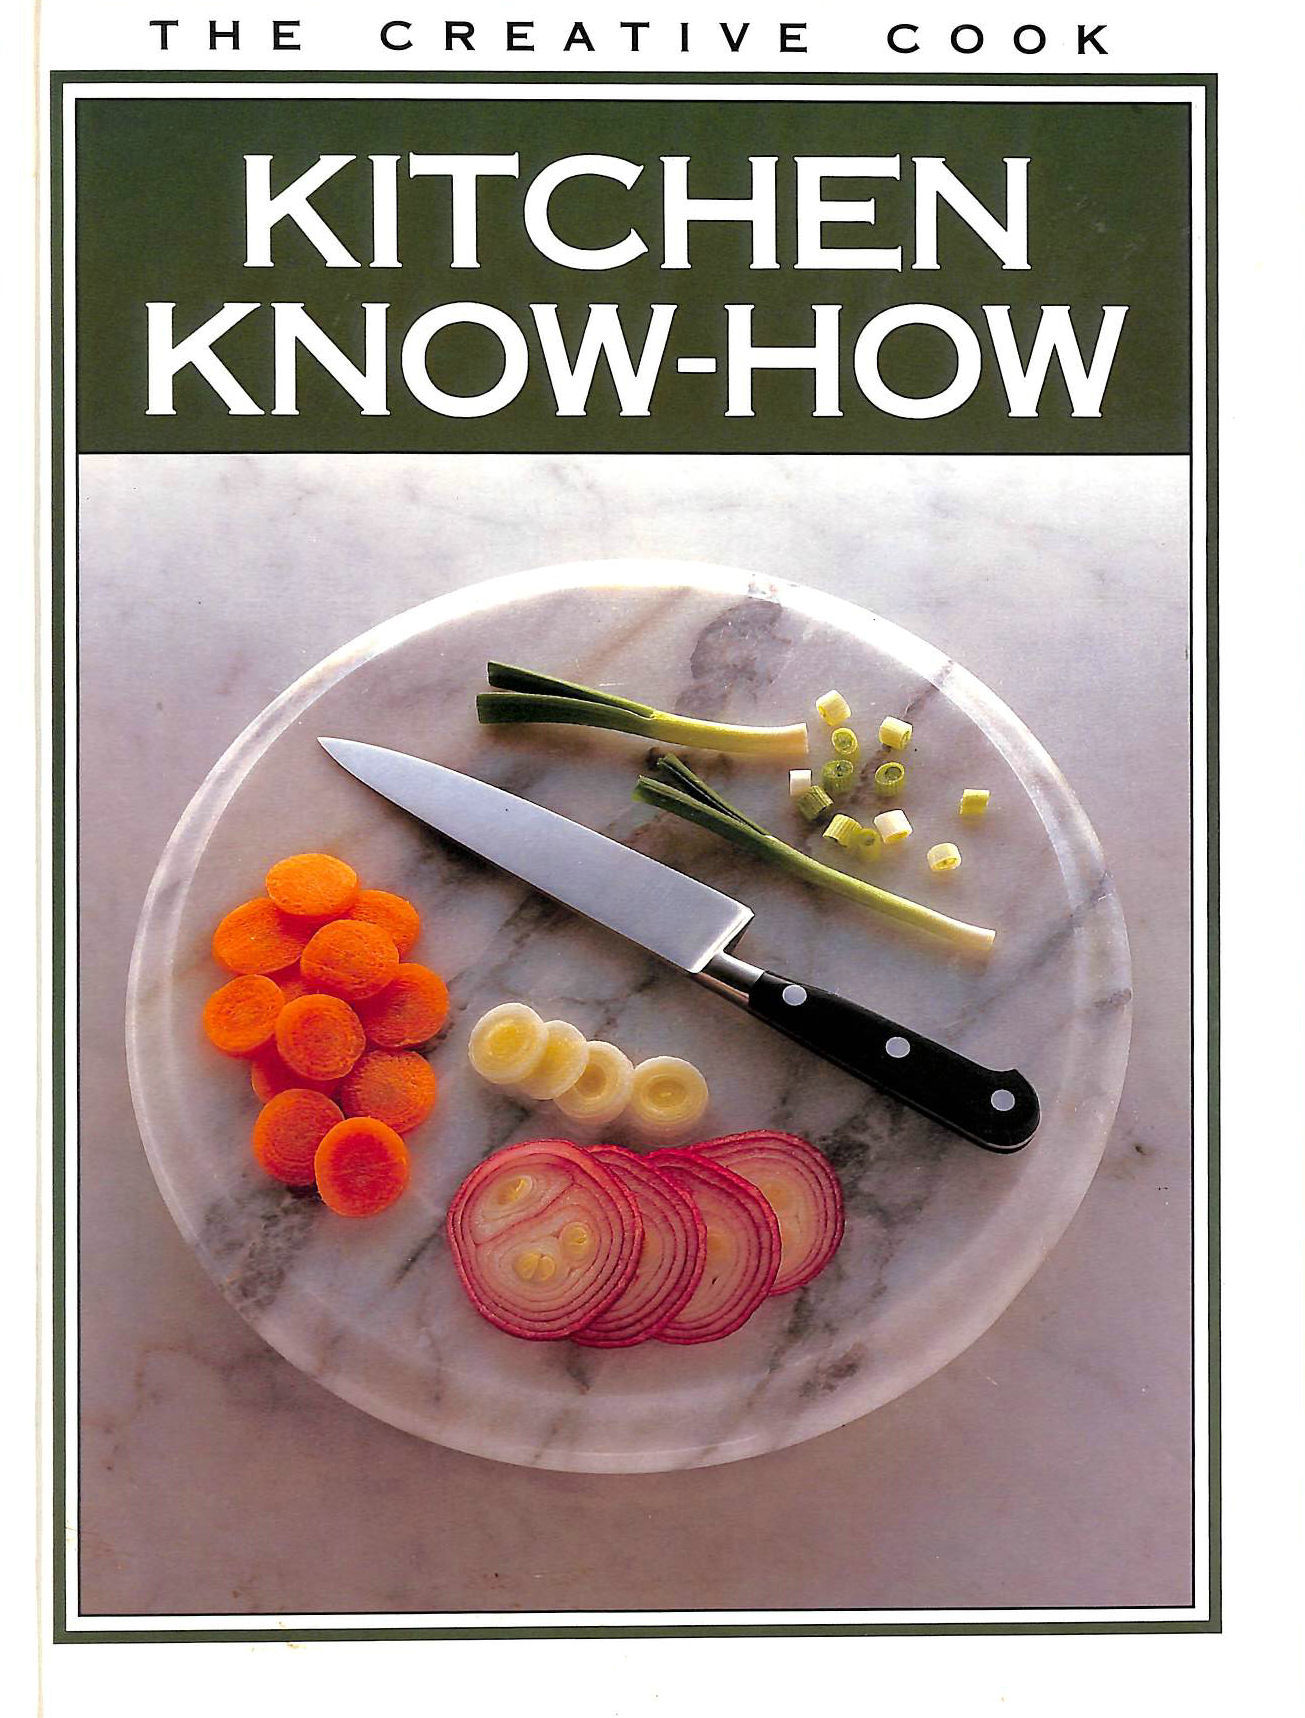 ANON - Kitchen Know-How (The Creative Cook)